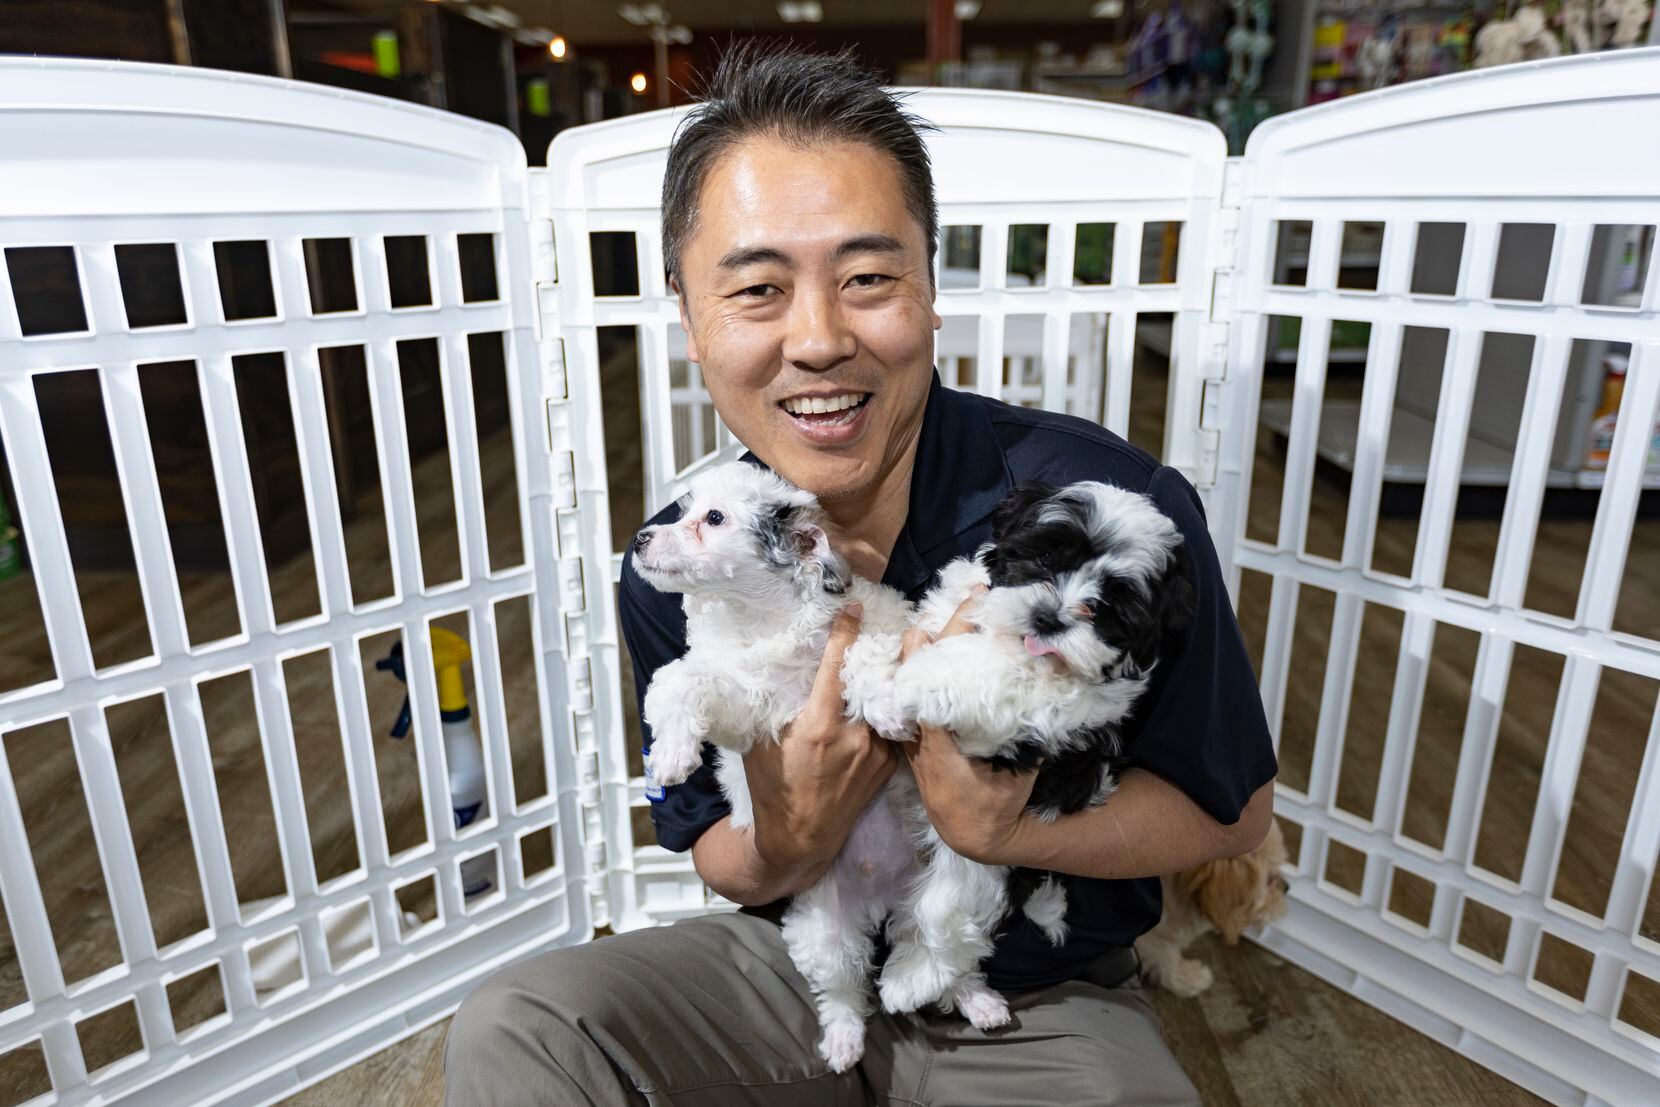 Petland owner Jay Suk poses for a photo with two puppies for sale at his store in Dallas,...